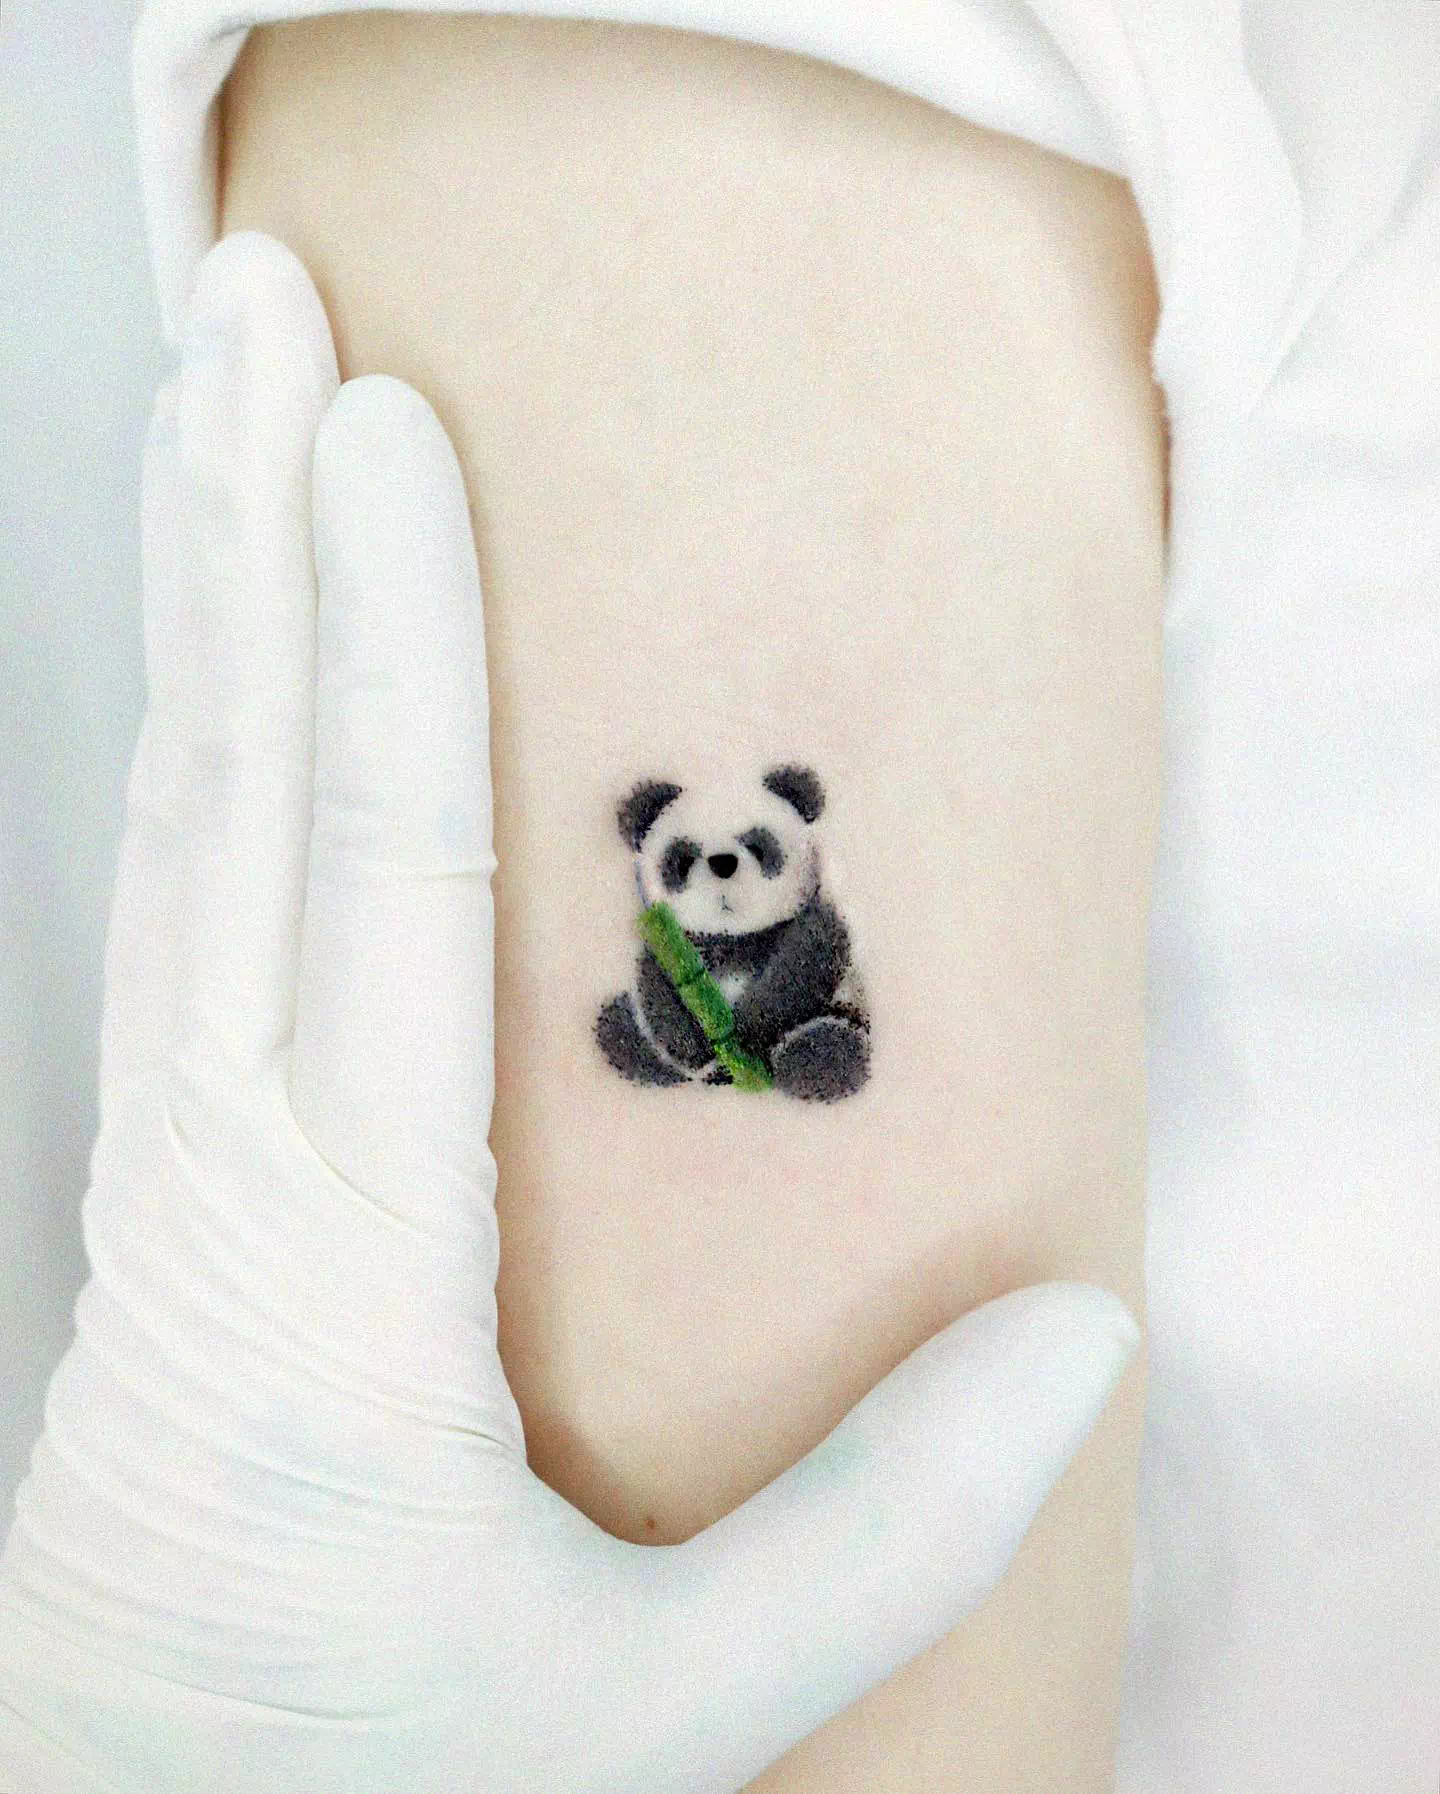 Panda Tattoo Ideas For Your Stomach